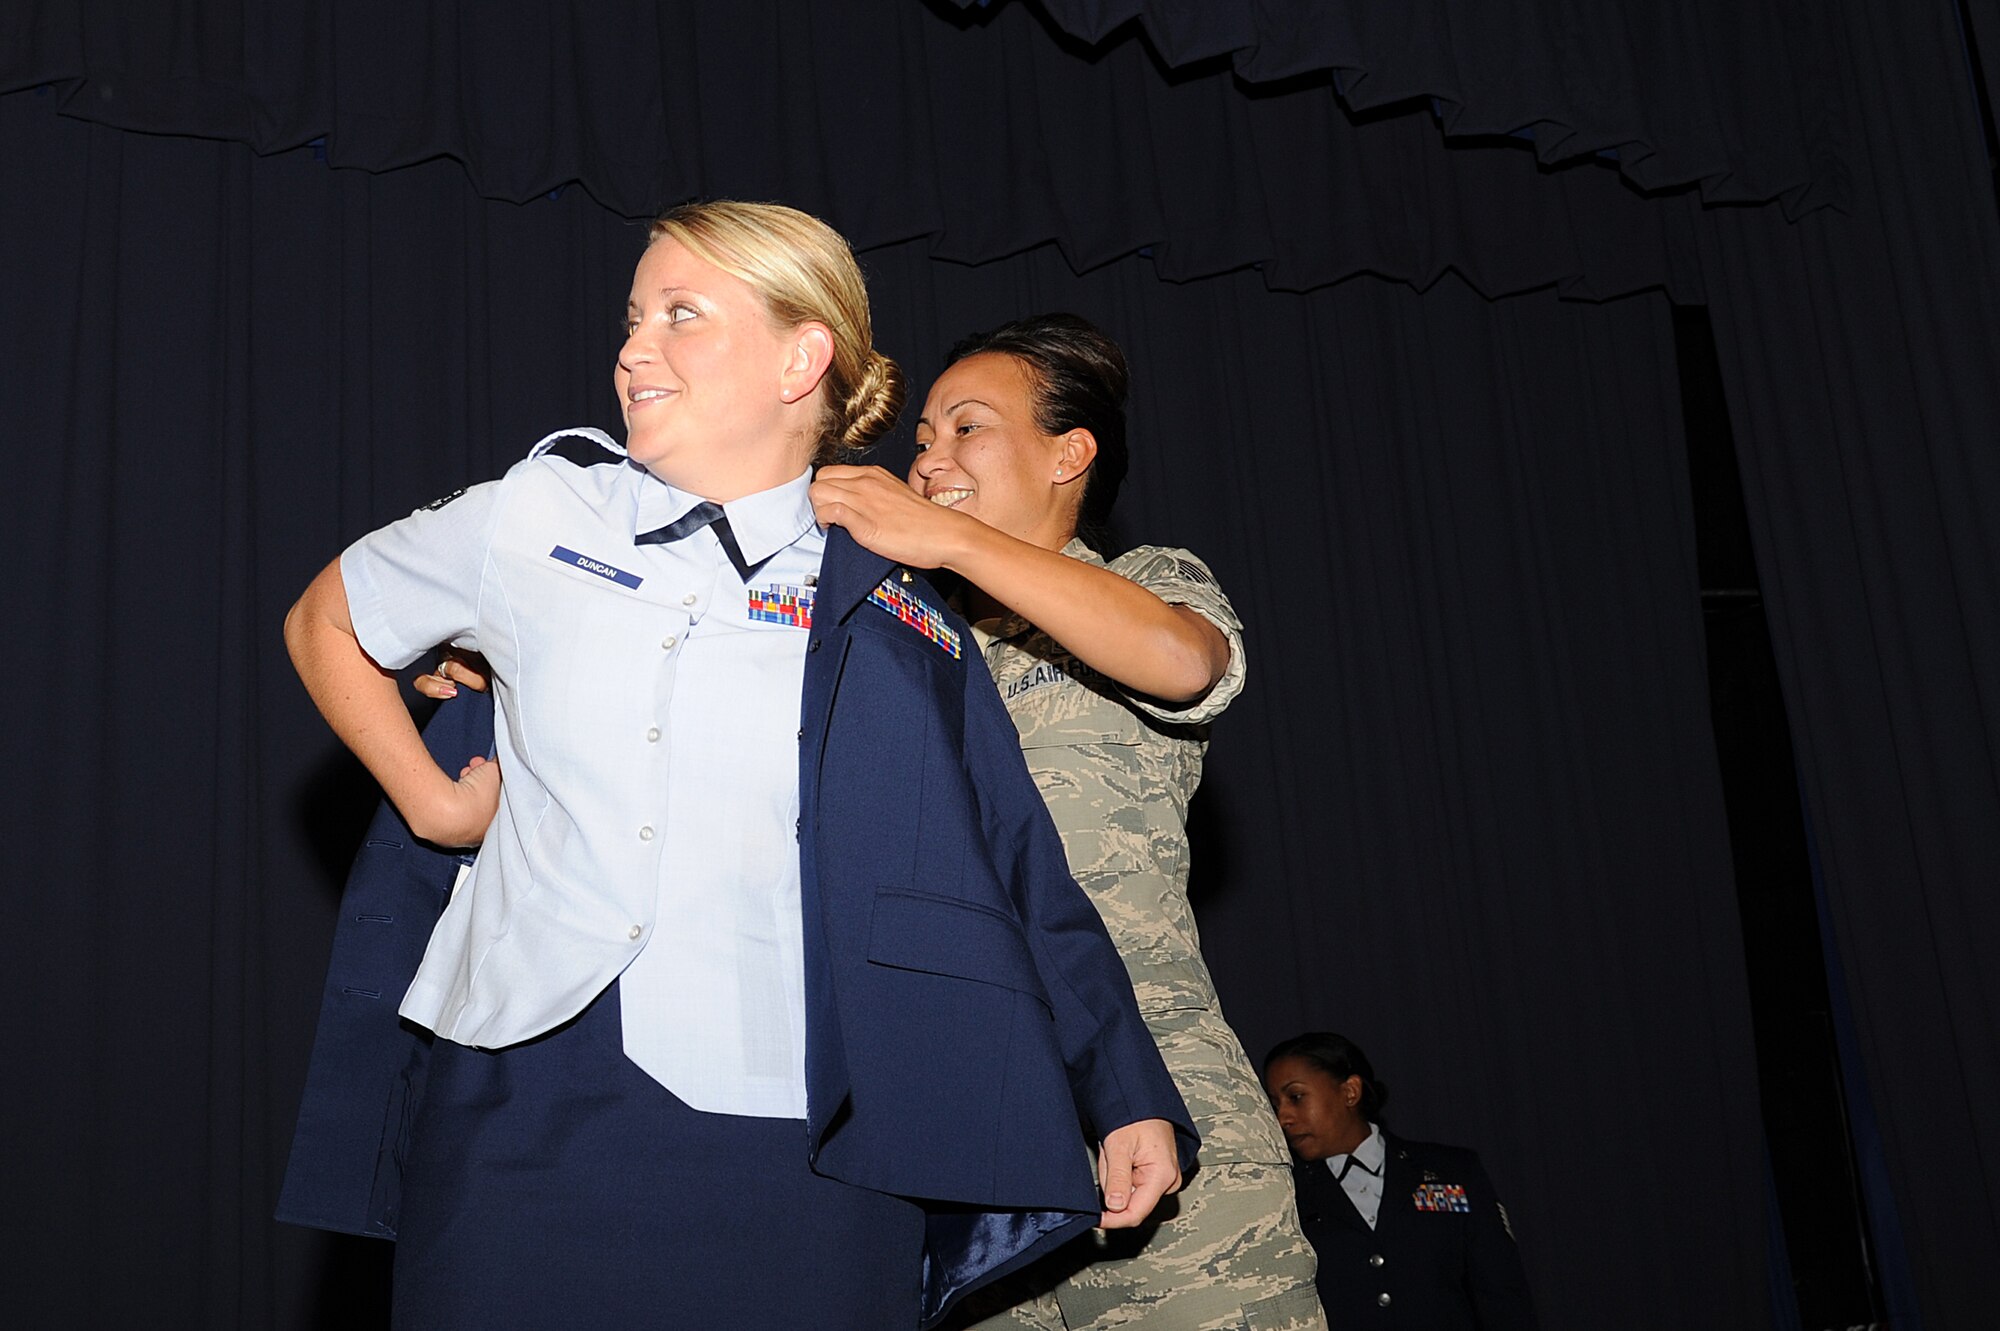 U.S. Air Force Staff Sgt. Tracy Duncan, a pharmacy technician with 1st Special Operations Medical Support Squadron, joins the NCO corps during an NCO recognition ceremony at the King Auditorium on Hurlburt Field, Fla., Oct. 30, 2012. During the NCO recognition ceremony the Airmen put on their staff sergeant stripes for the first time. (U.S. Air Force Photo/Airman 1st Class Michelle Vickers)